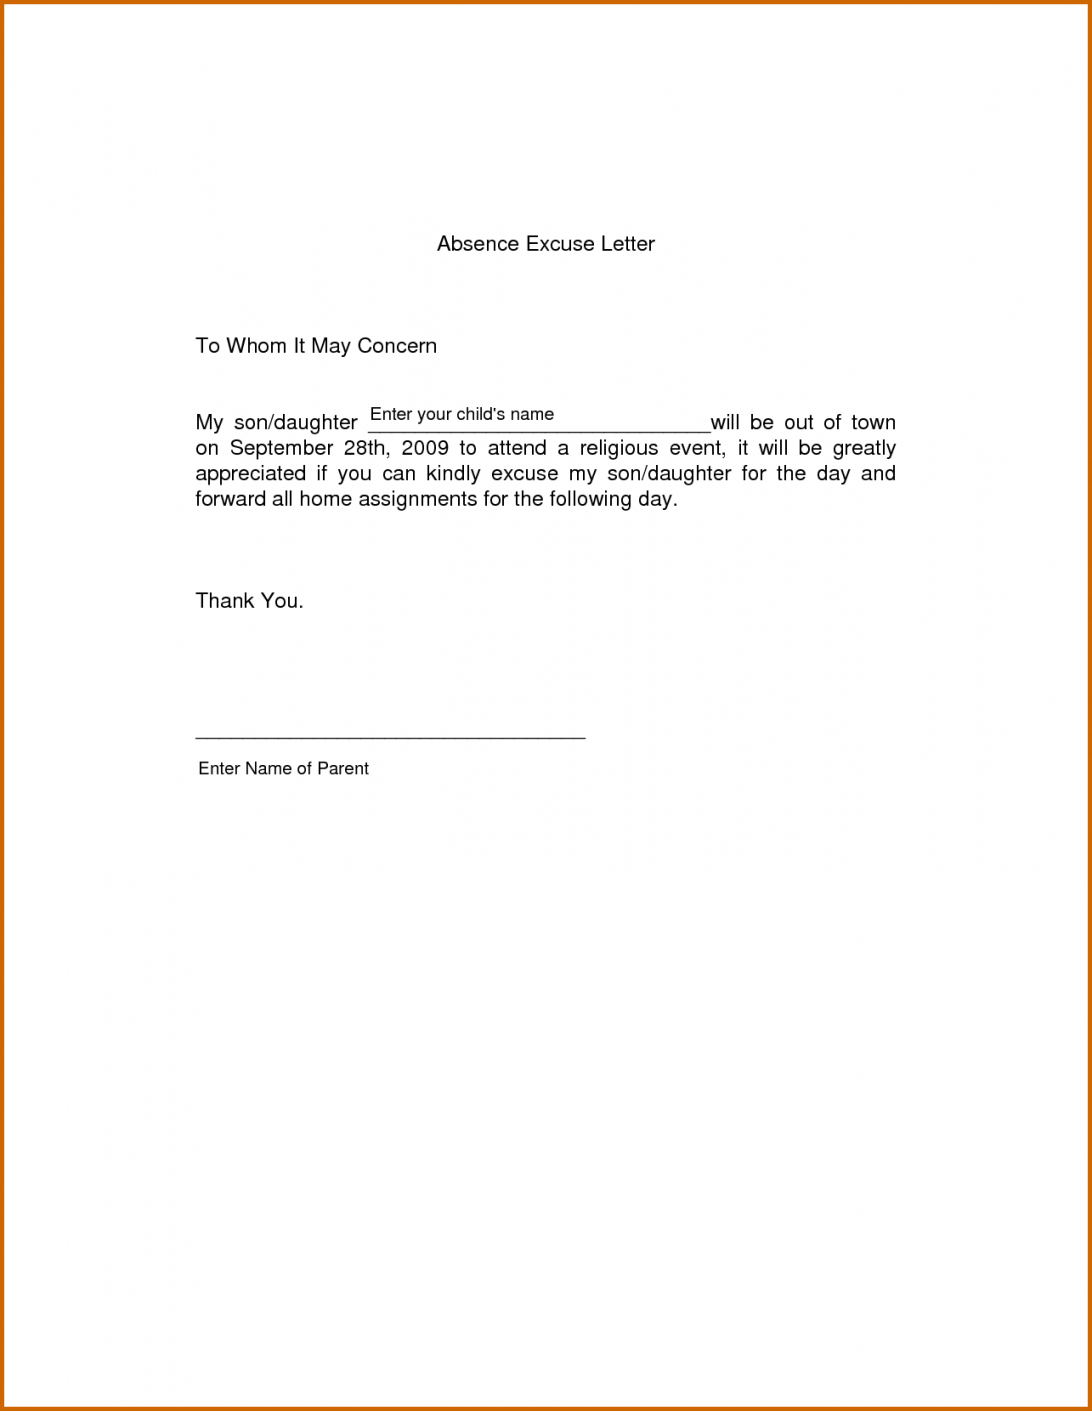 School Excuse Note Absence Template Sample Doctors For Sick With Regard To Doctors Note For School Template